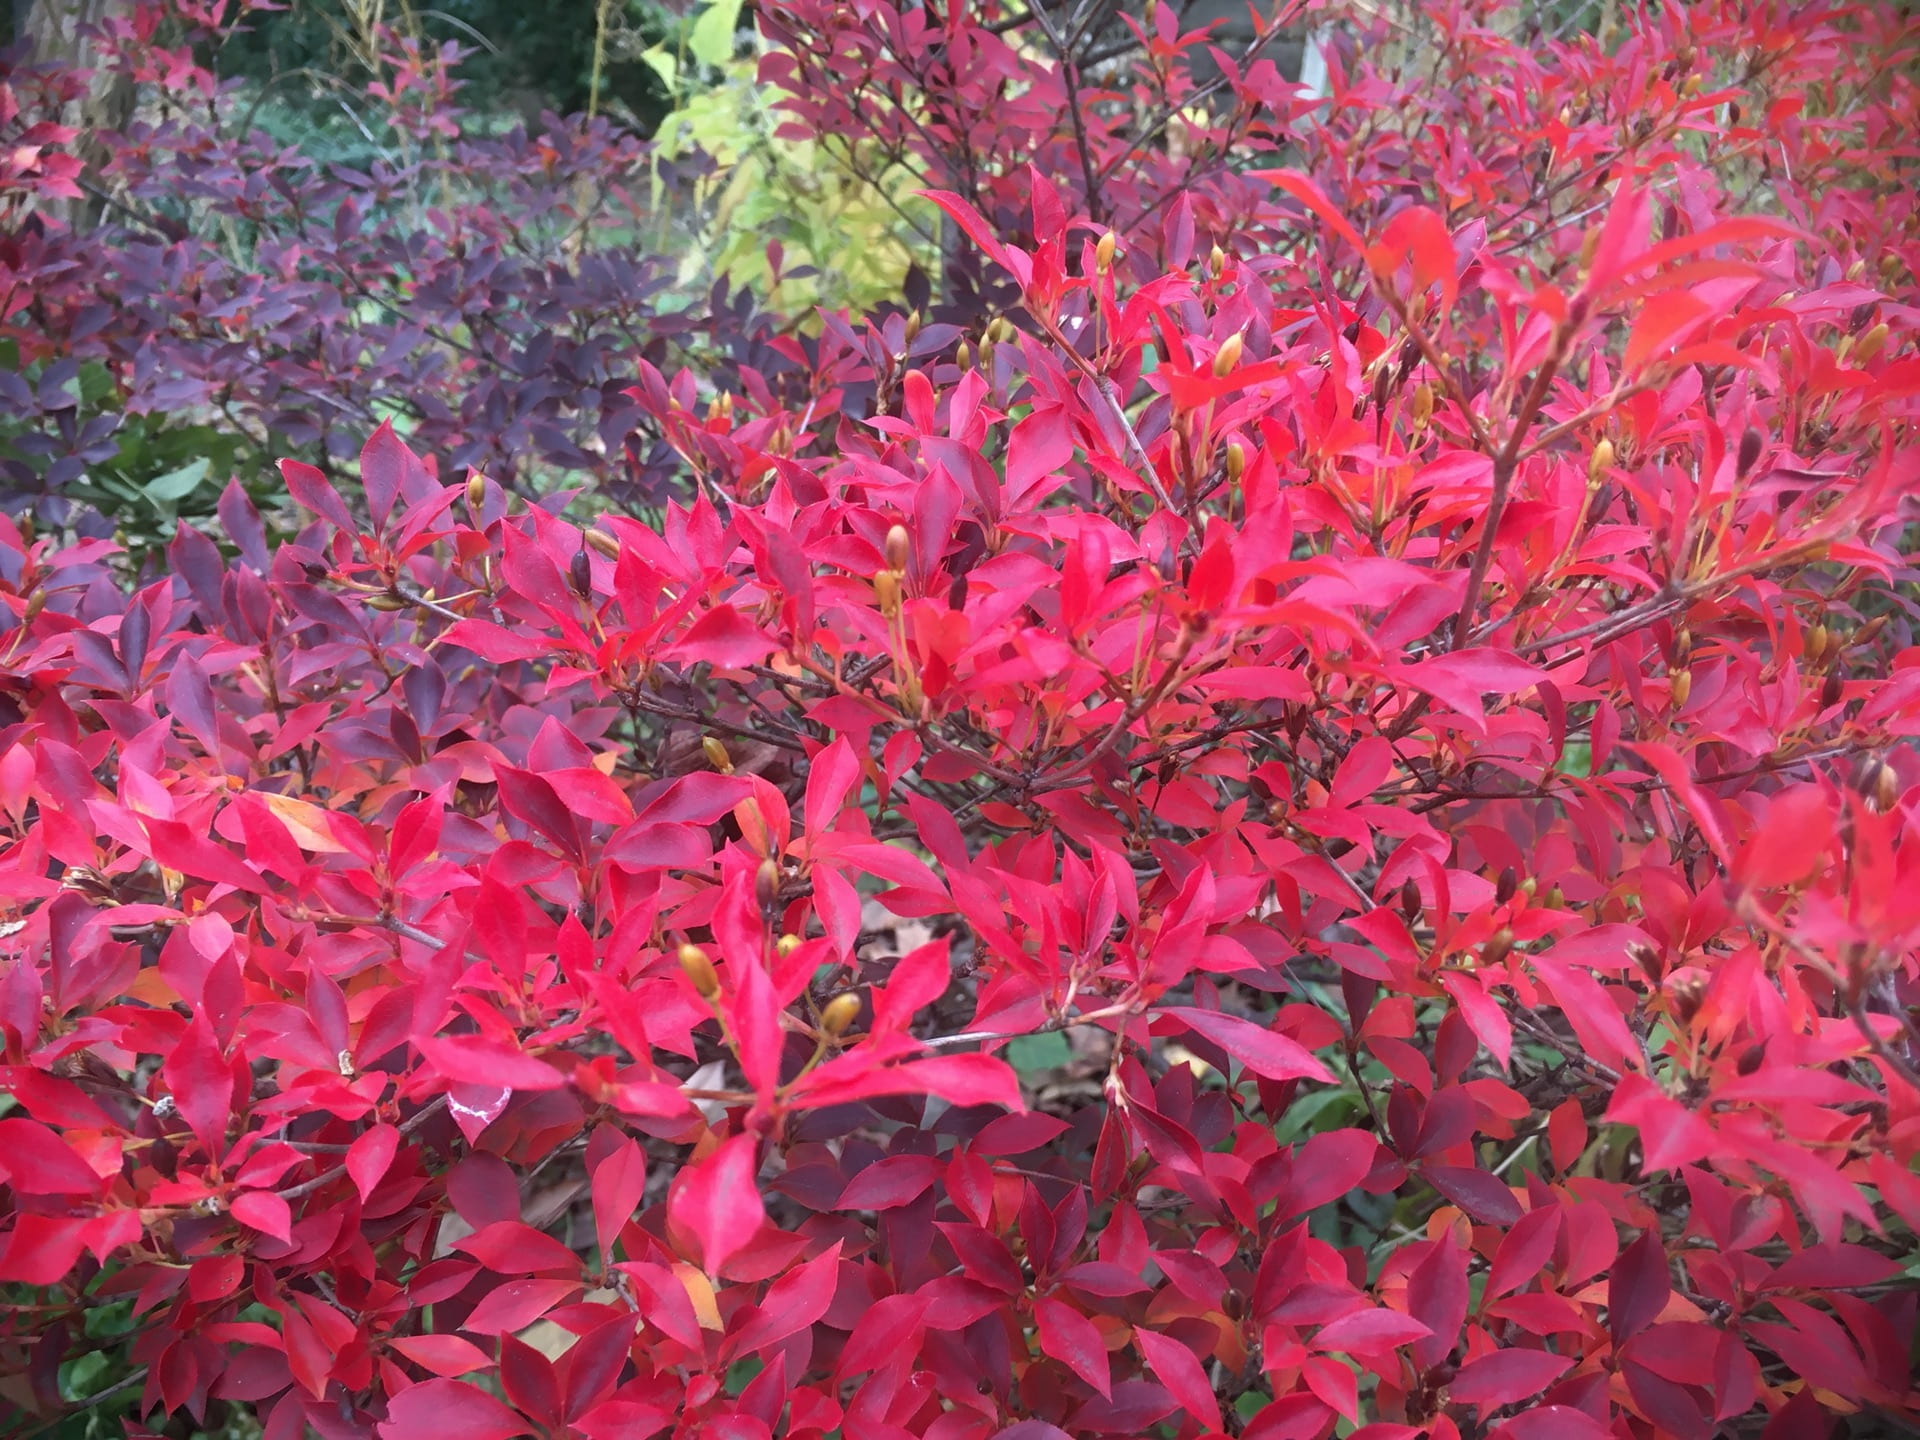 The foliage of Enkianthus perulatus putting on a fiery show.